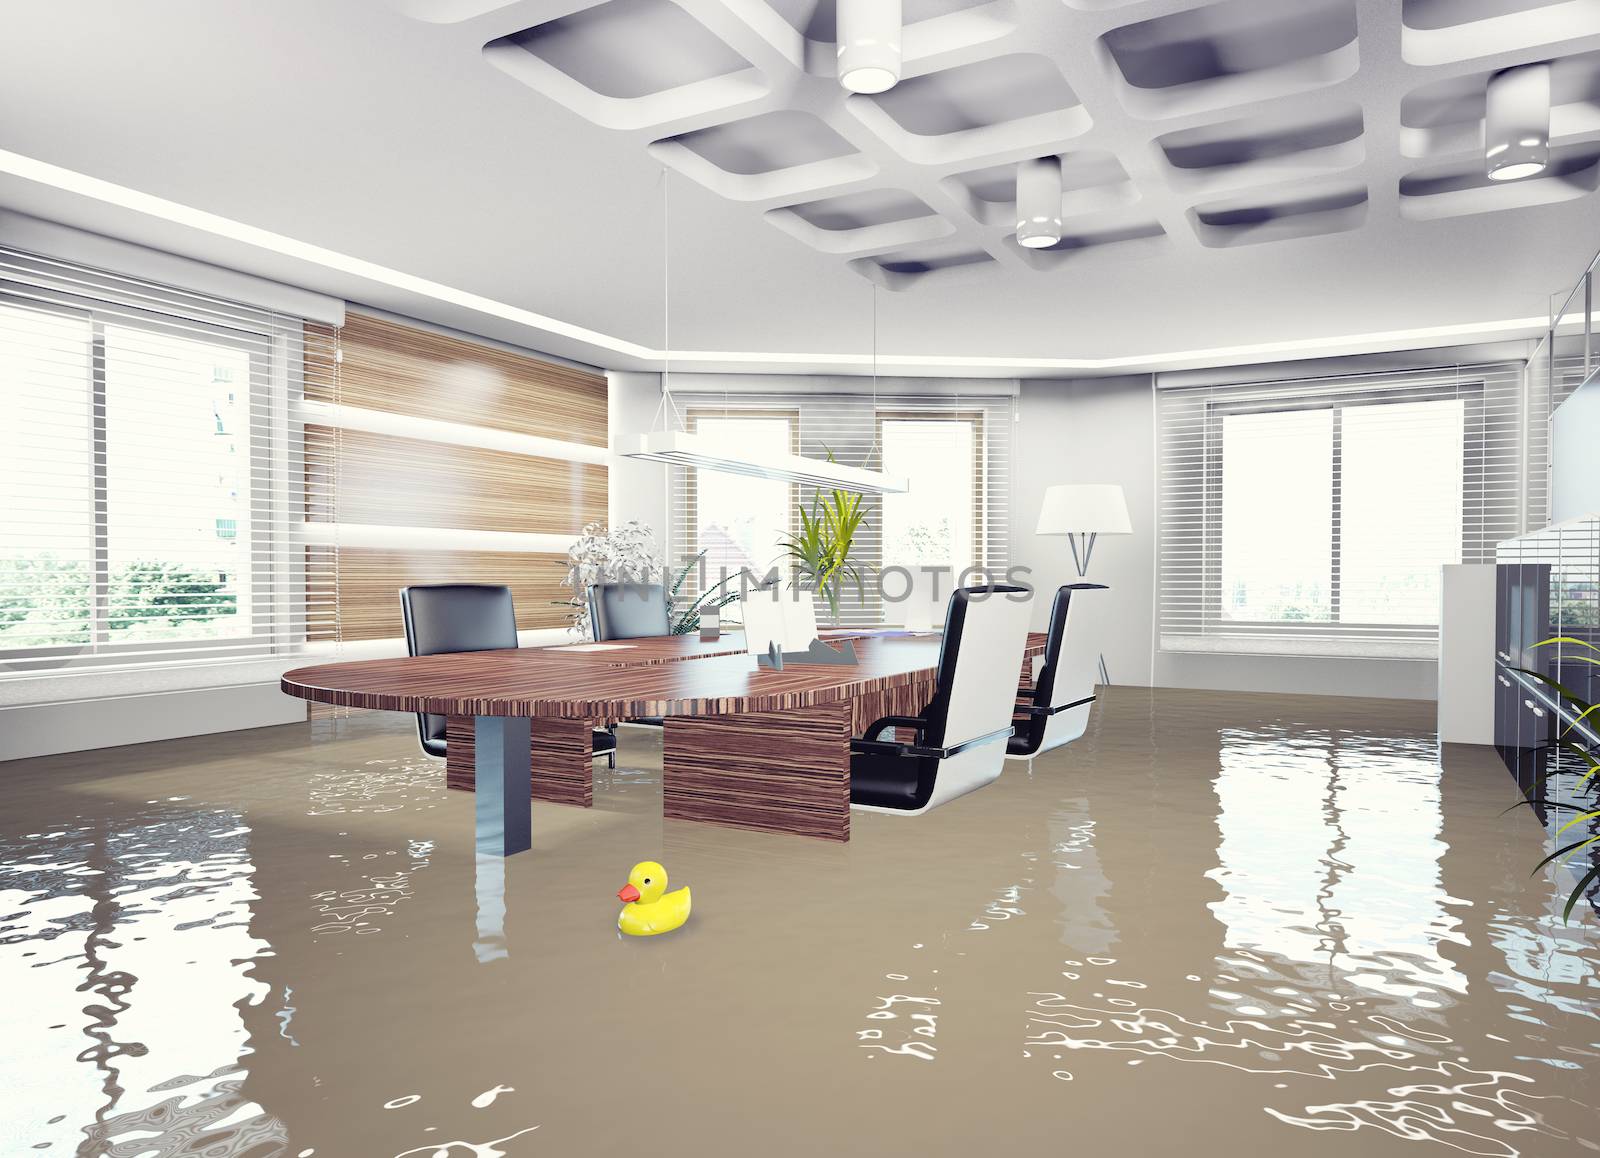 flooding office interior. by vicnt